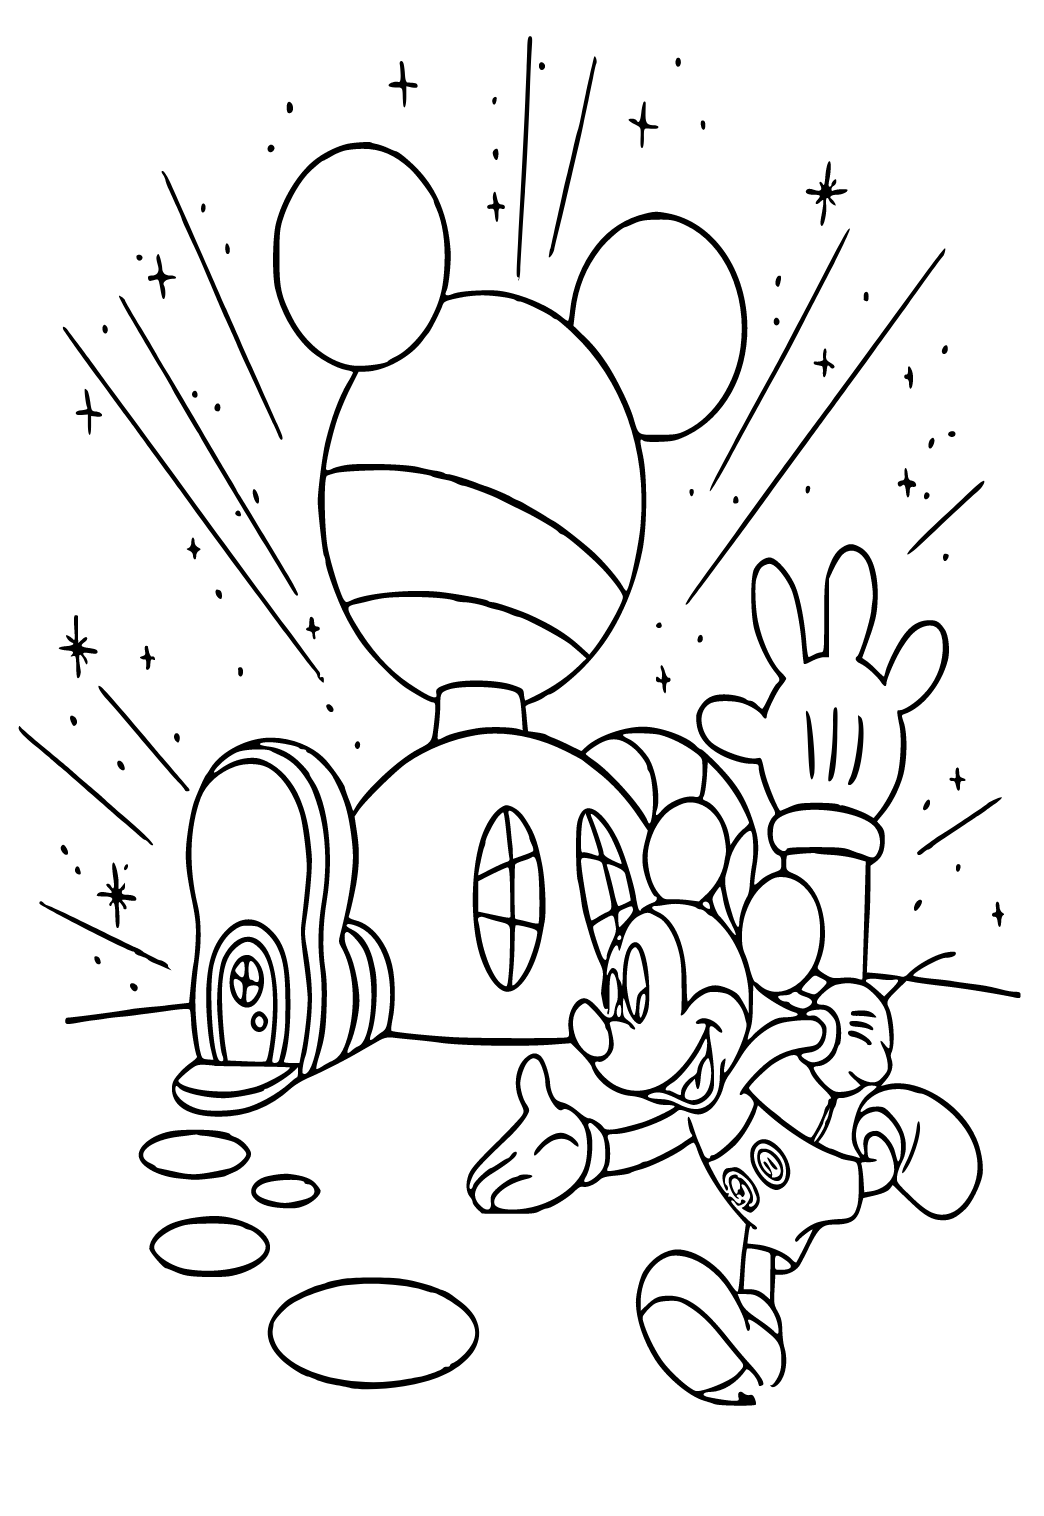 Free printable mickey mouse clubhouse house coloring page sheet and picture for adults and kids girls and boys